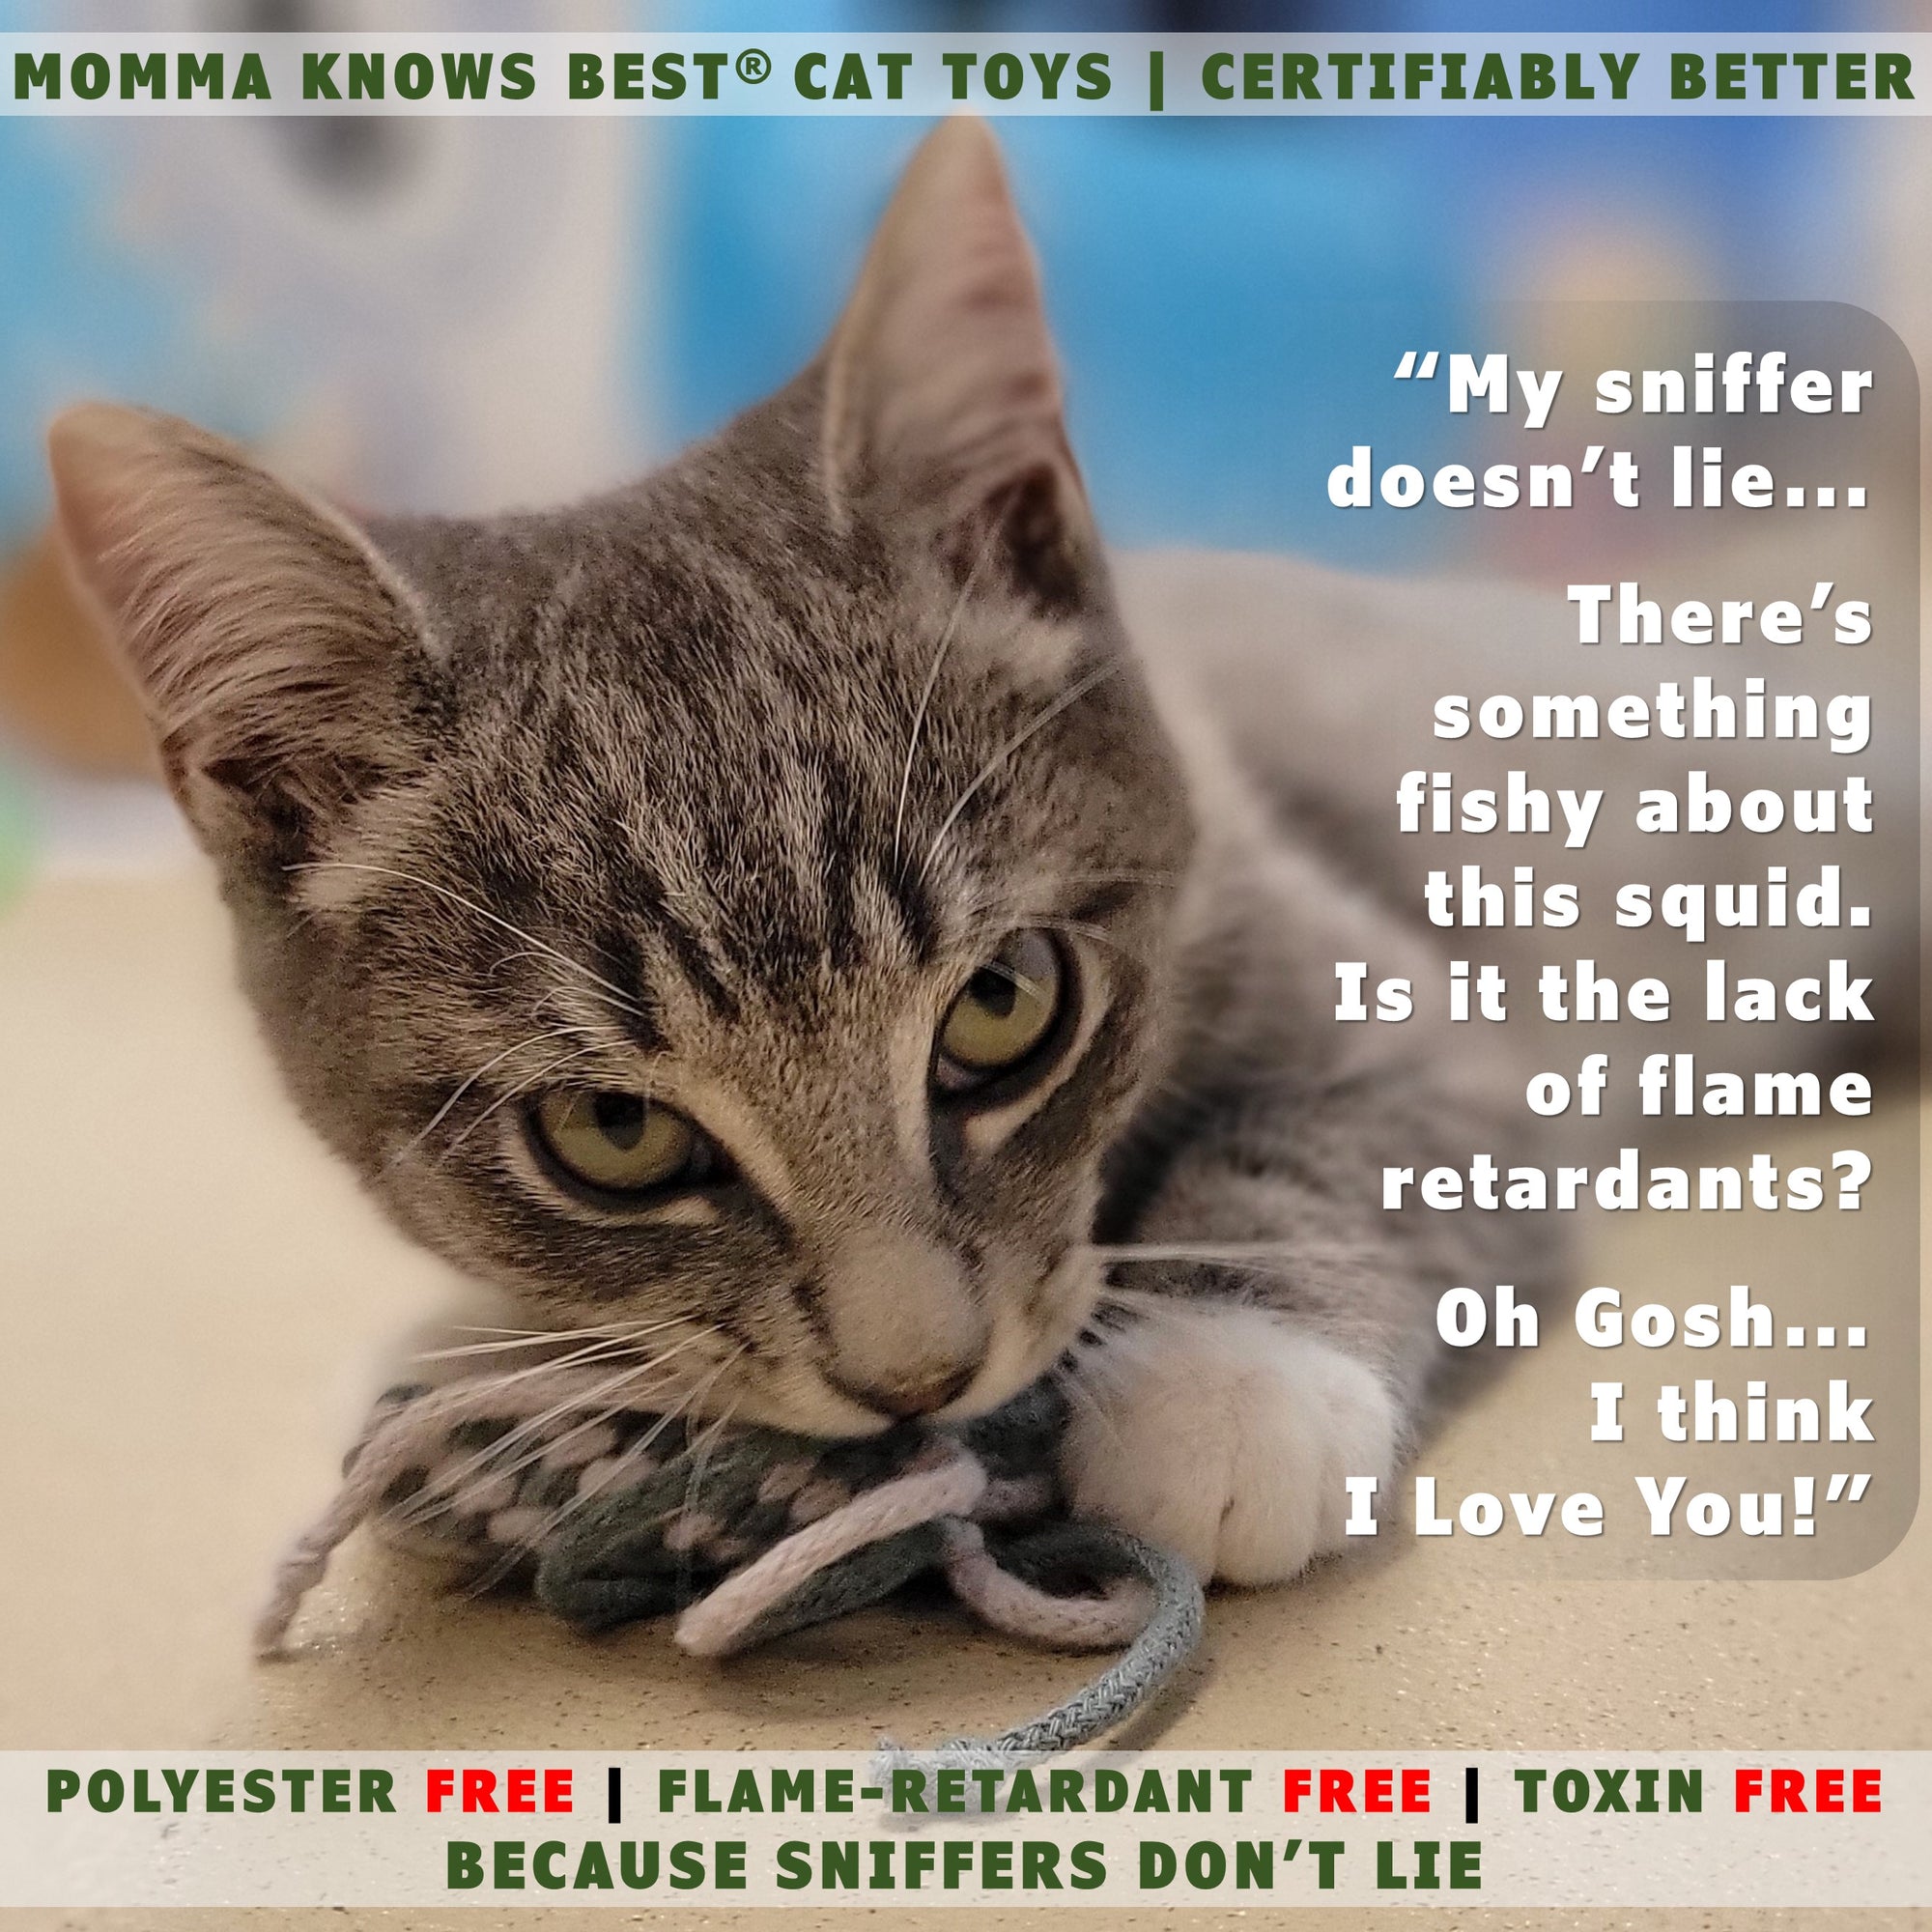 Non toxic cat toys by momma knows best